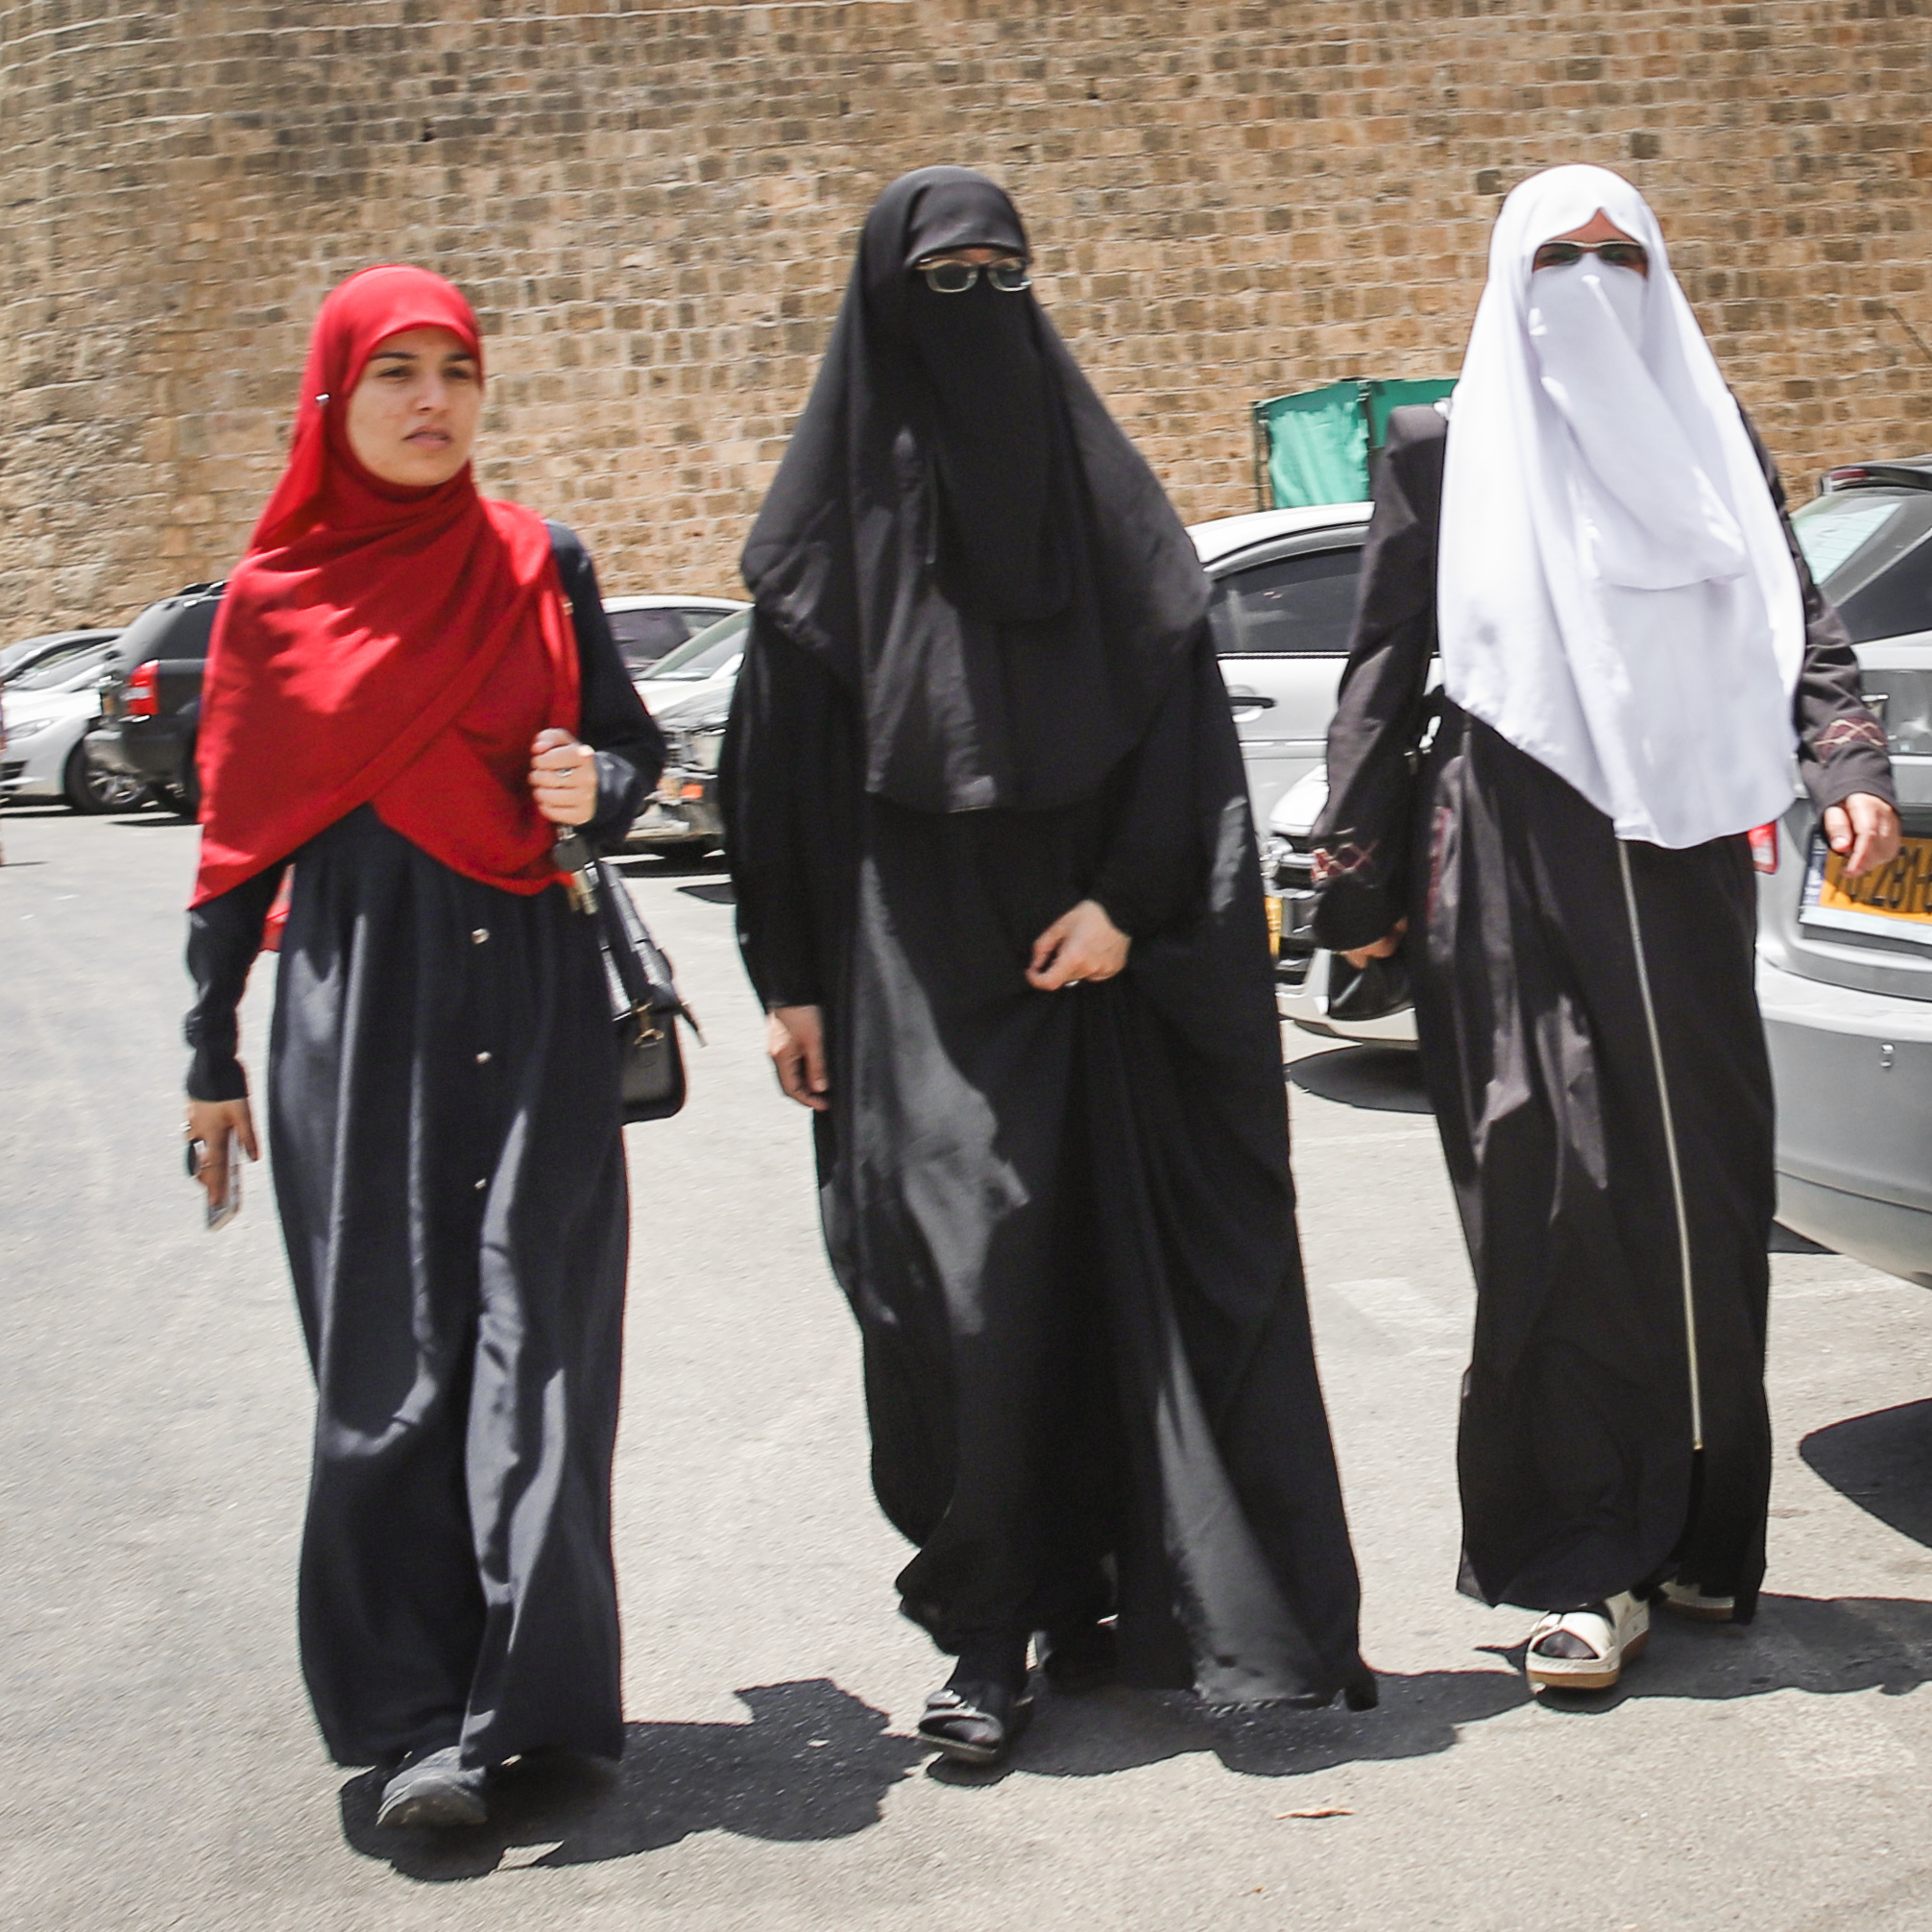 wearing of full face coverings, including niqab and burqa